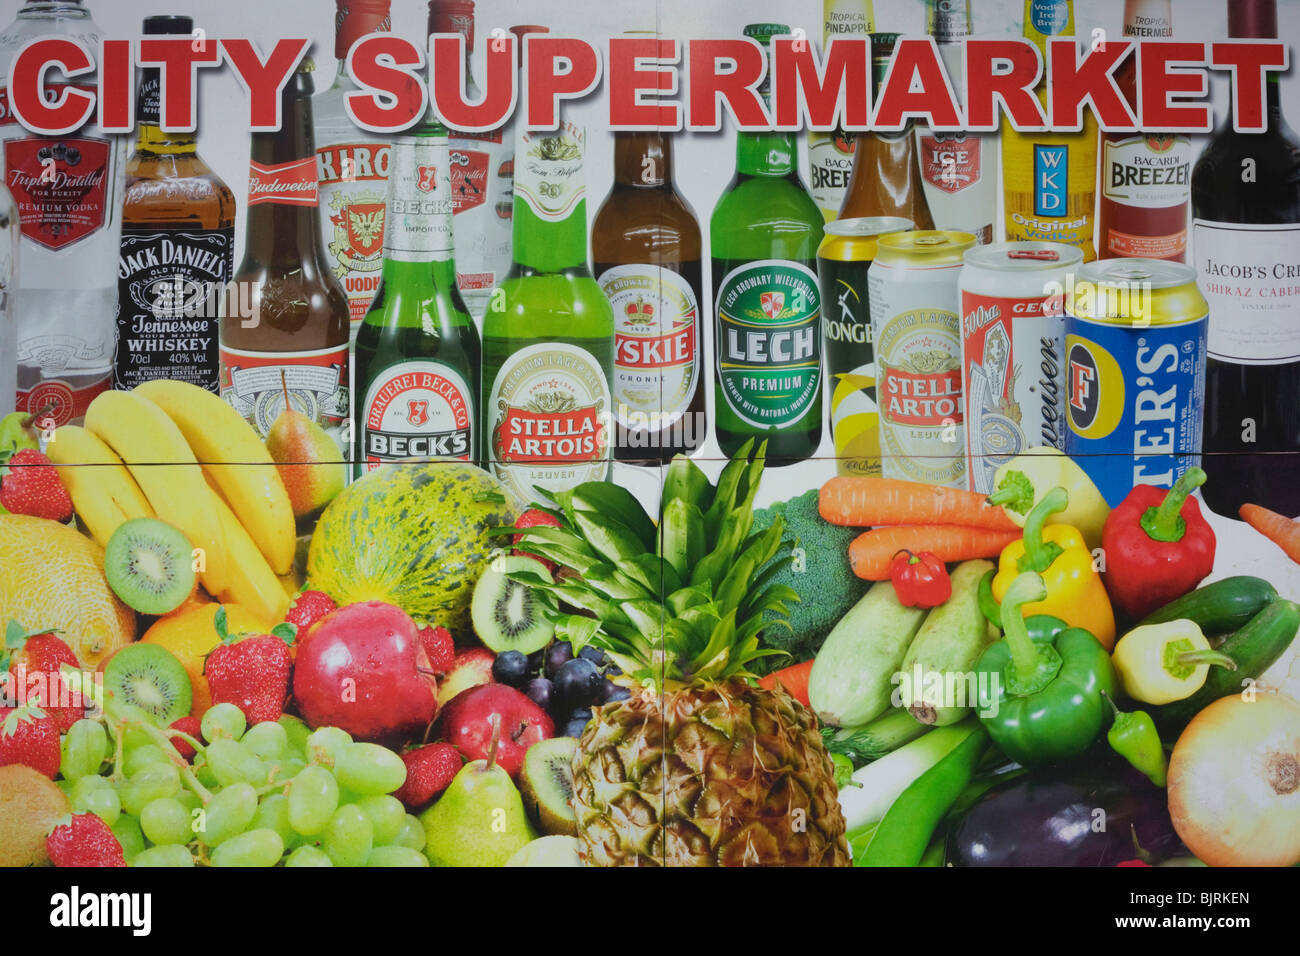 A city supermarket advertises bottles and cans of lager beers and fresh fruit and vegetables. Stock Photo